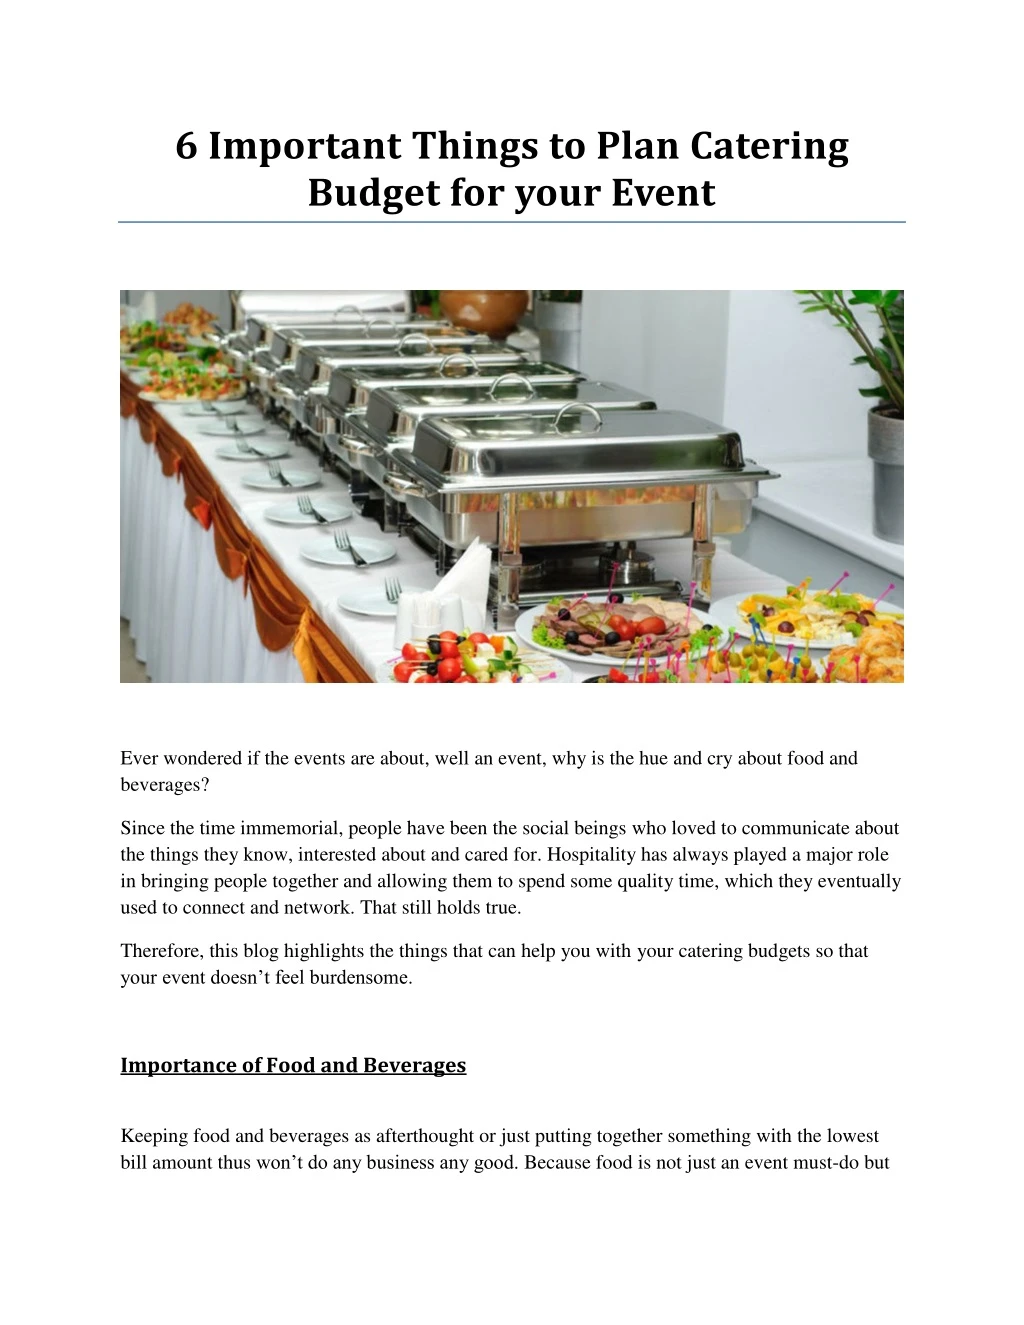 6 important things to plan catering budget